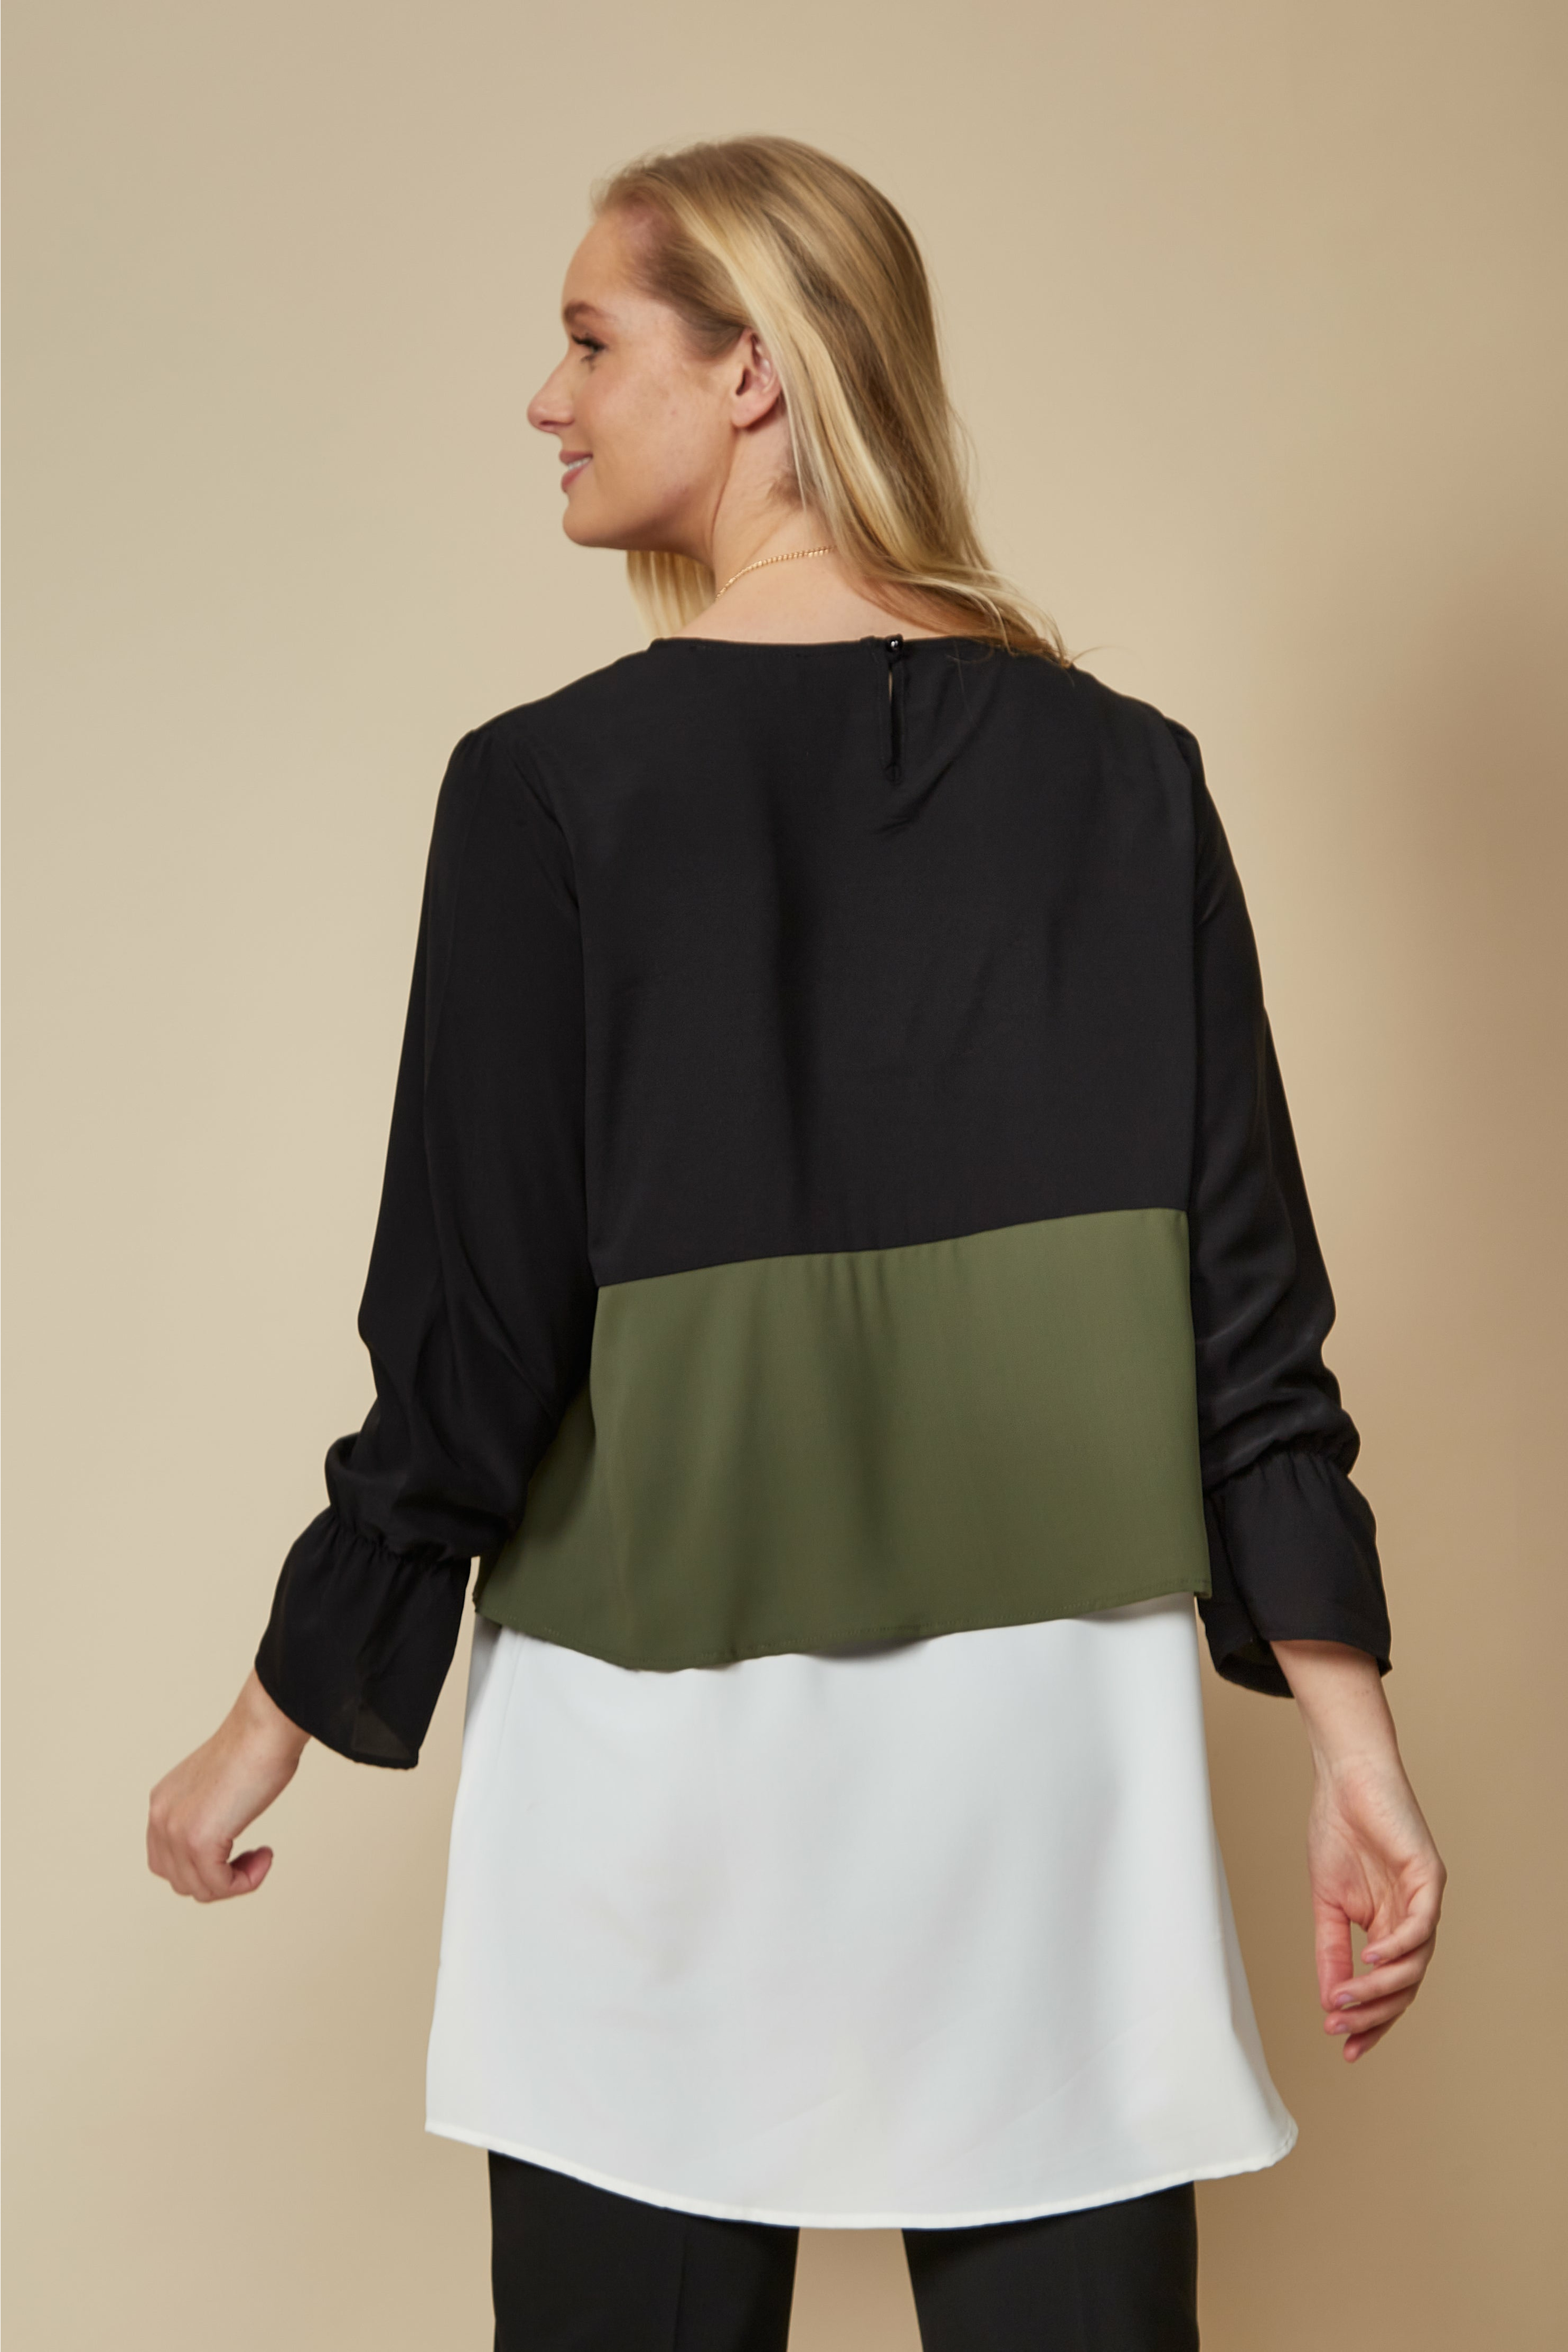 Oversized Colour Block Top in Black, Khaki and White with Necklace GLR FASHION NETWORKING